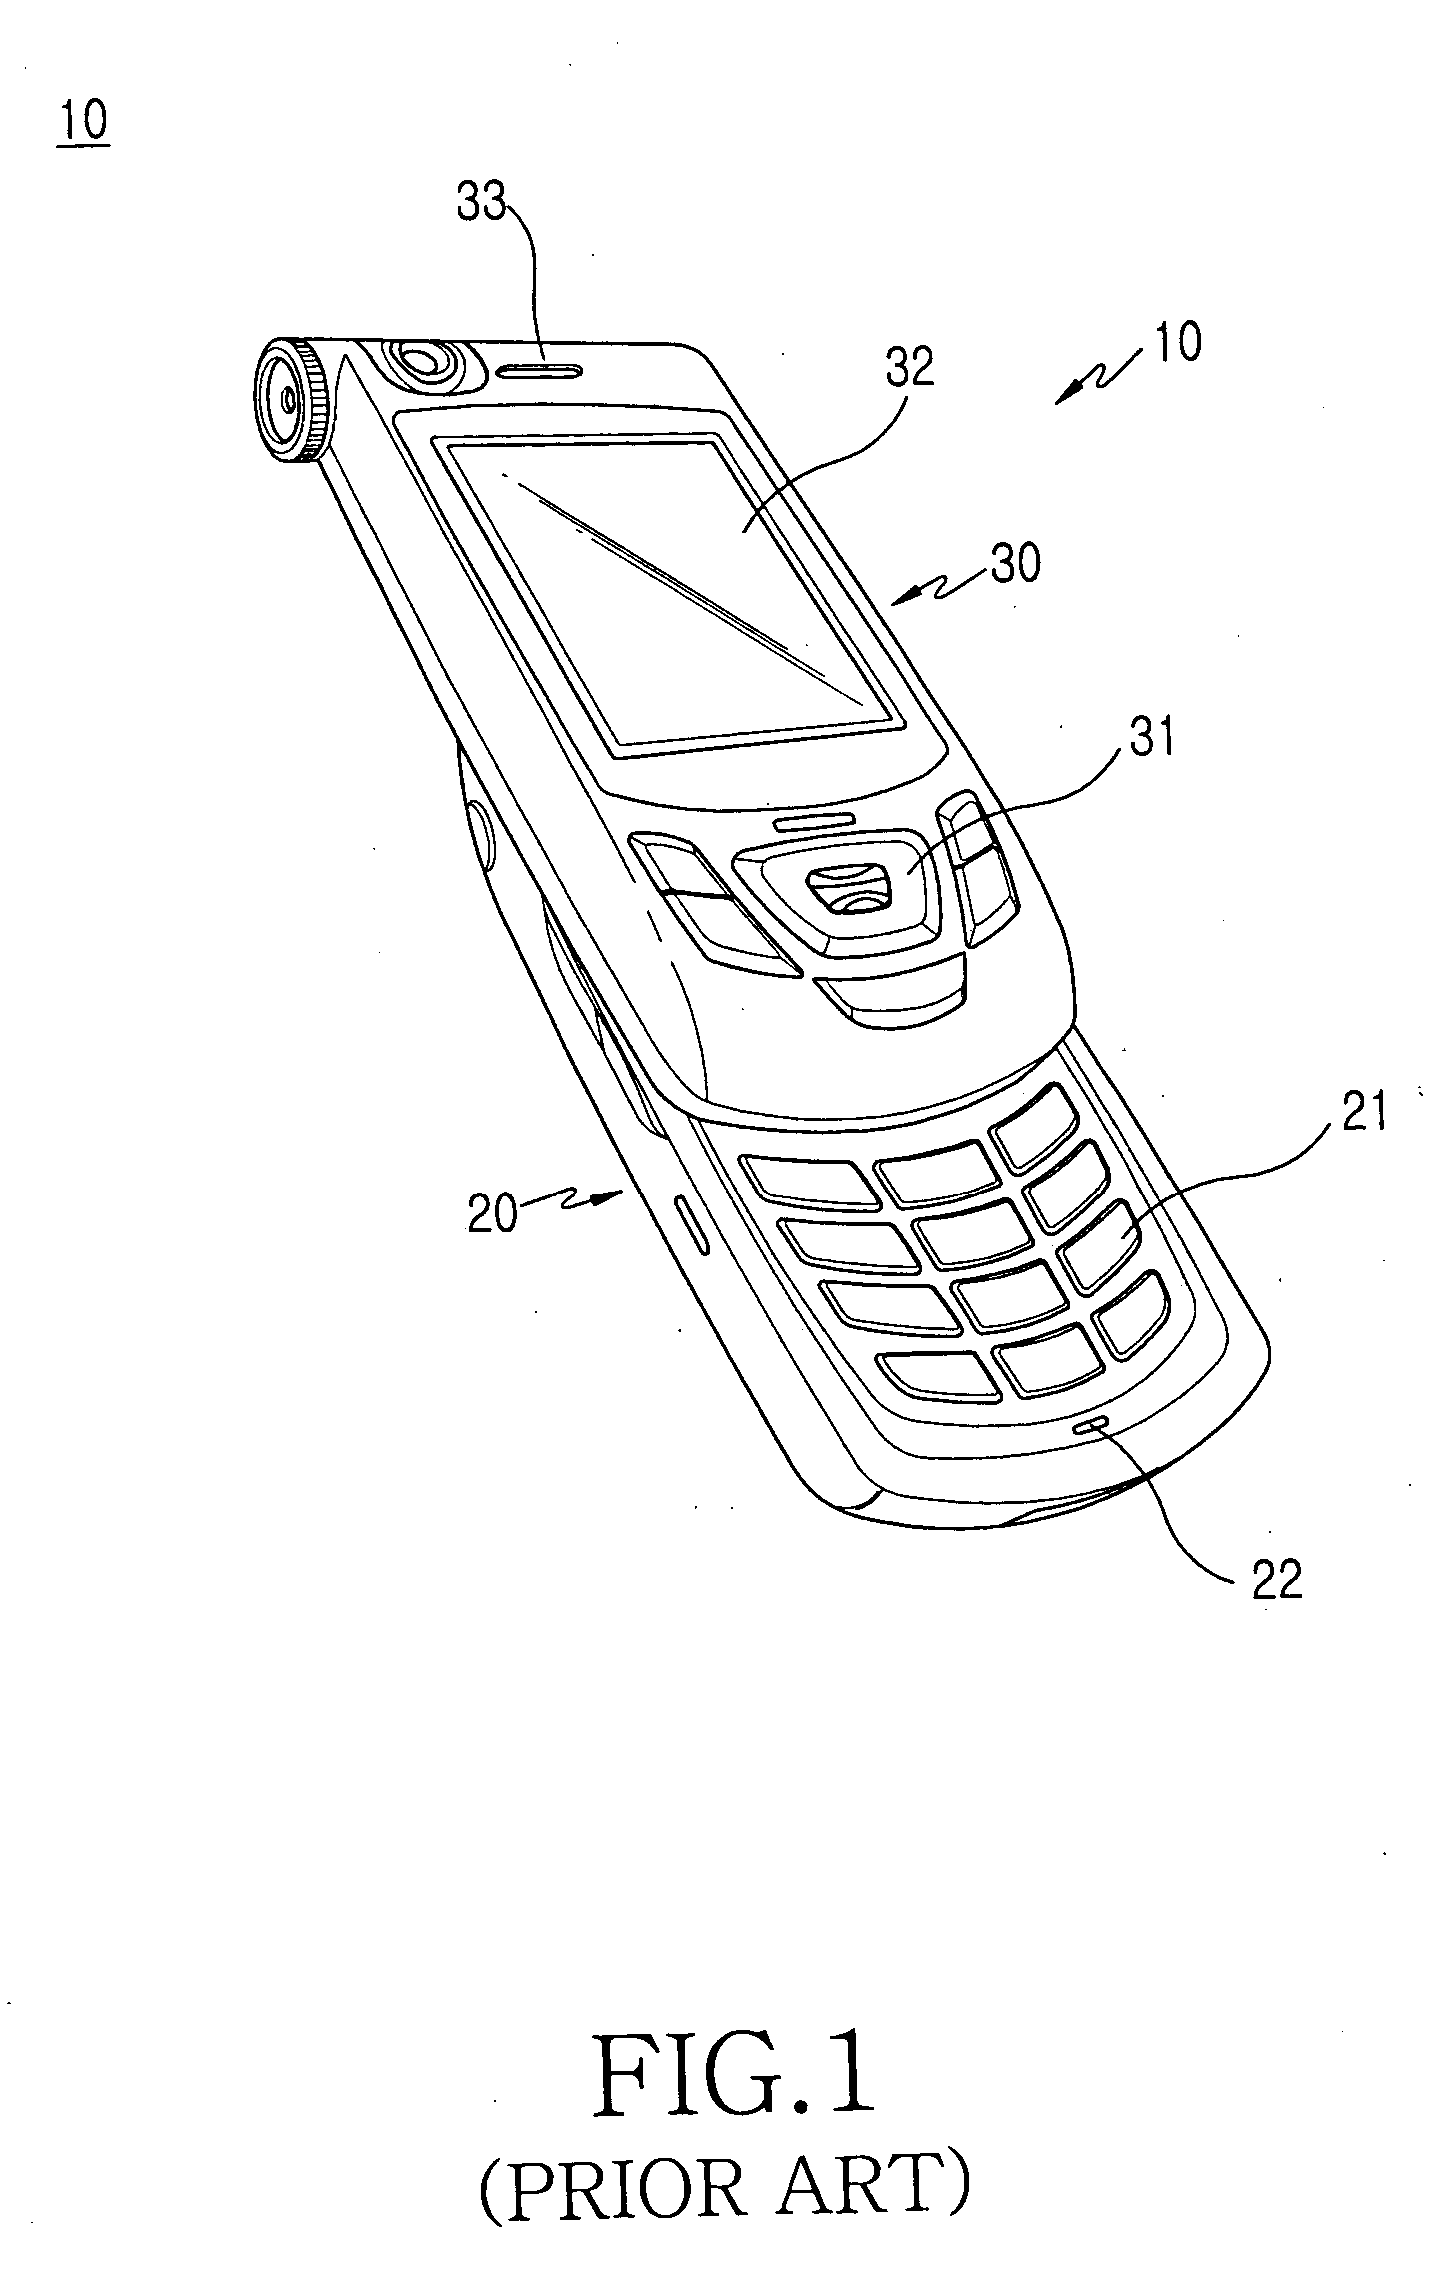 Flexible printed circuit board for electronic equipment